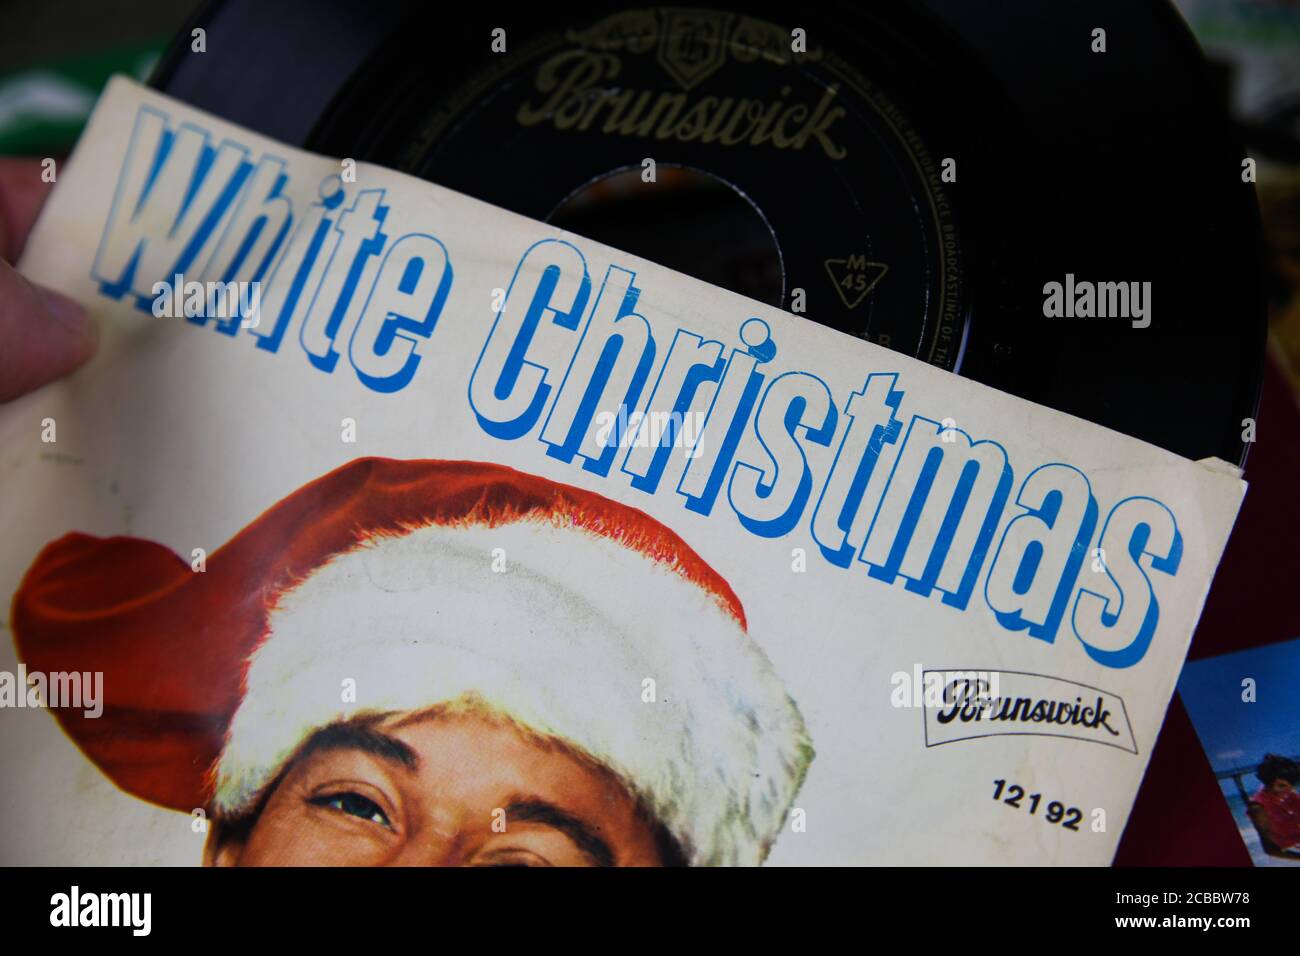 Viersen, Germany - July 9. 2020: Closeup of Bing Crosby white christmas single vinyl record cover from 1942 (focus on center) Stock Photo